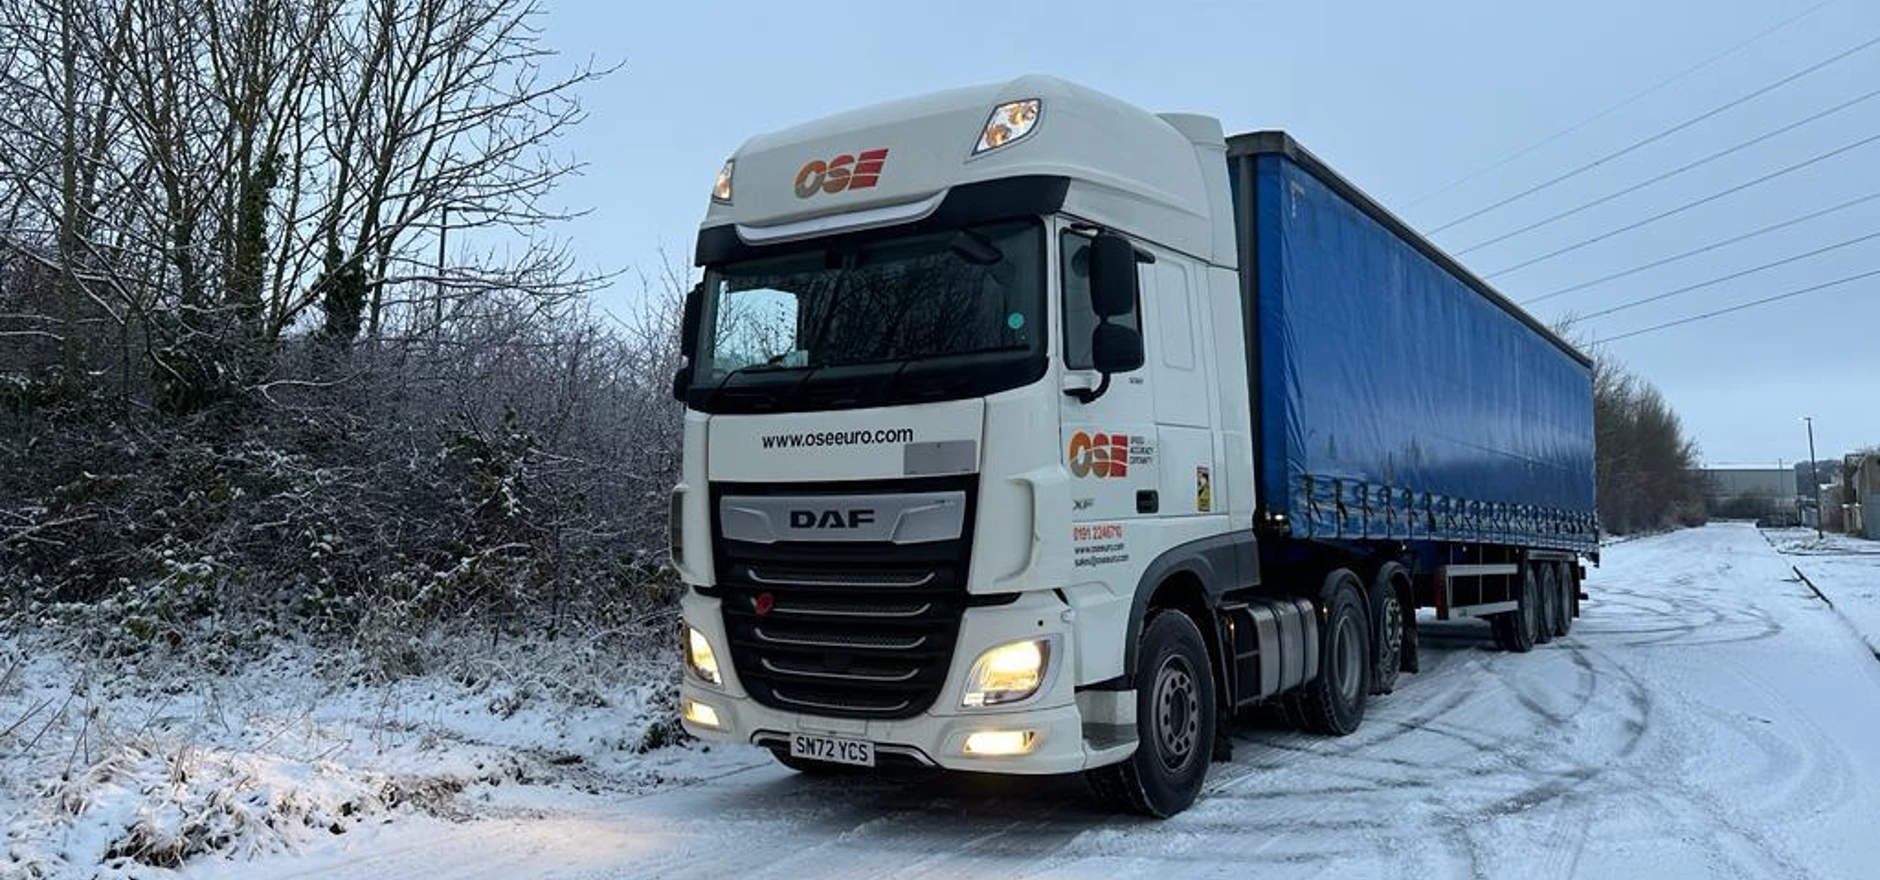 OSE European truck delivering consignment in Europe.